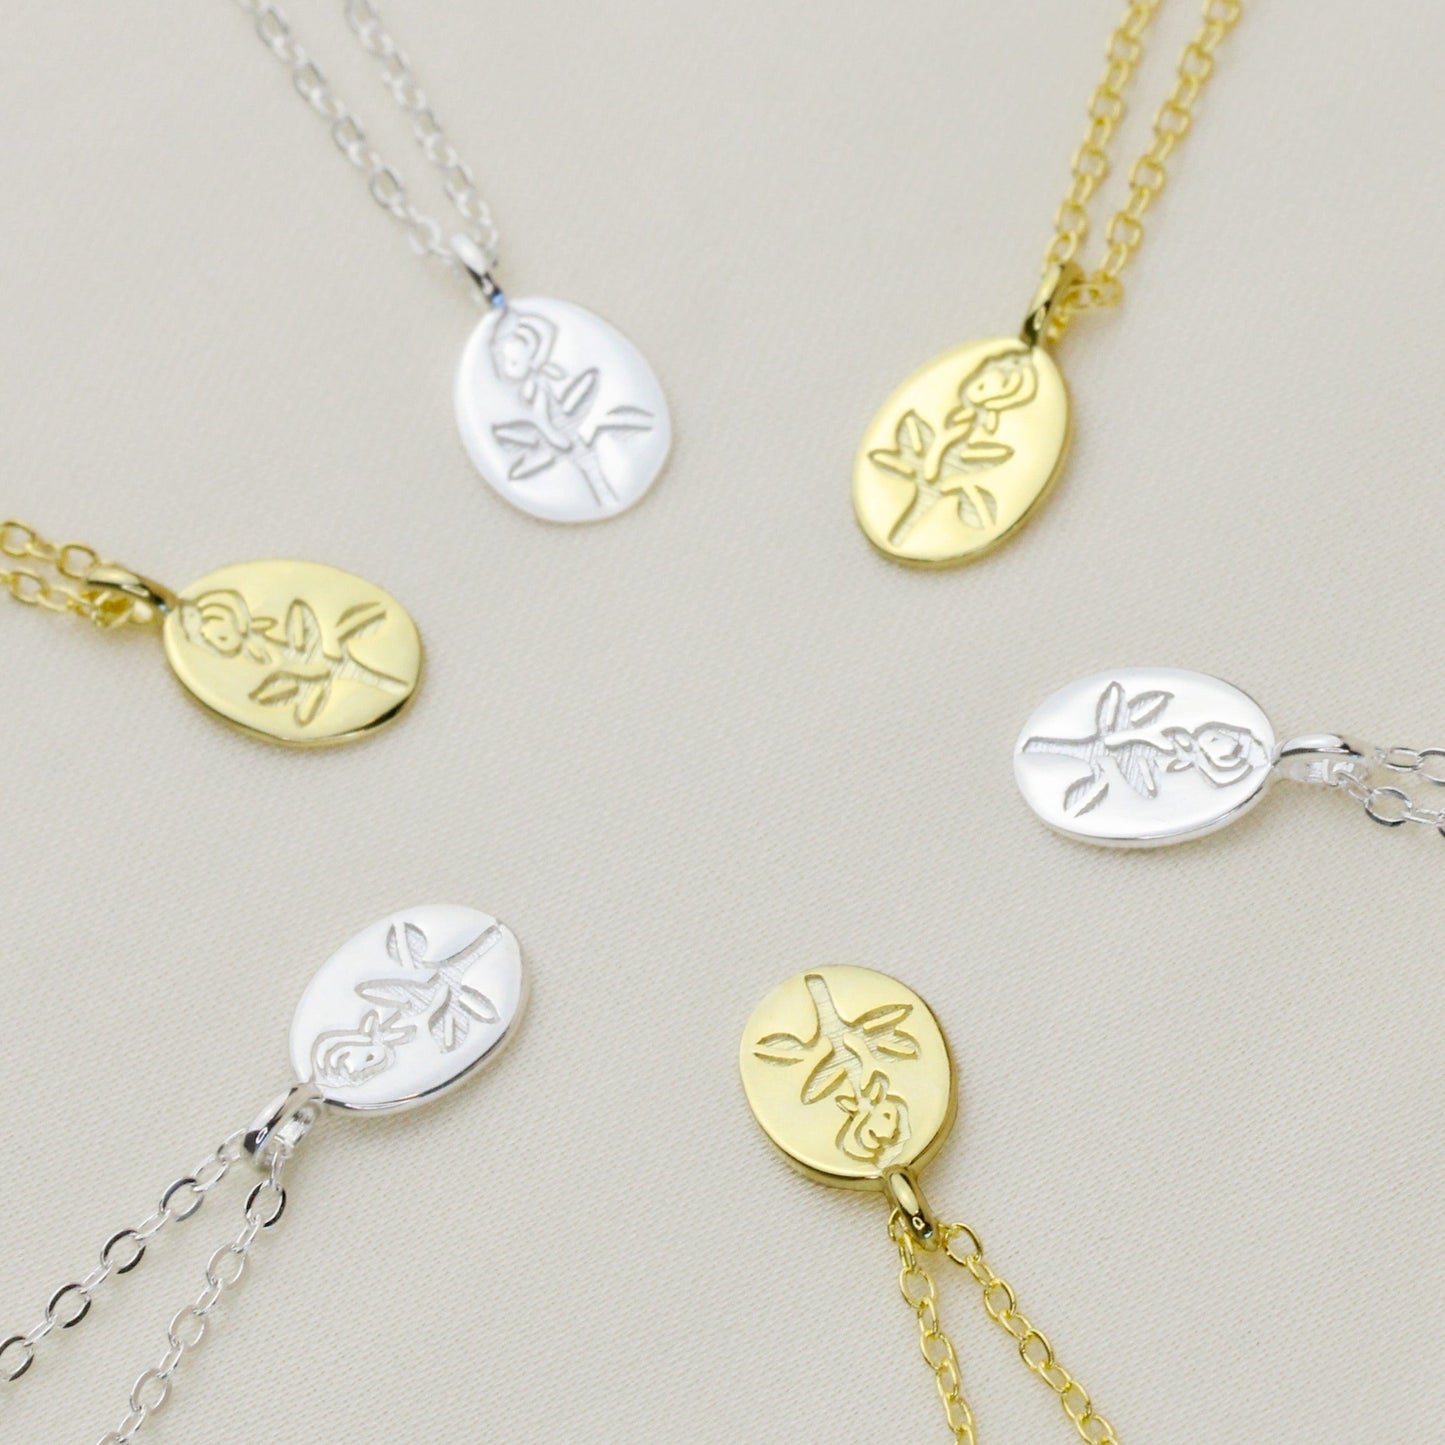 Engraved Rose Pendant Necklace